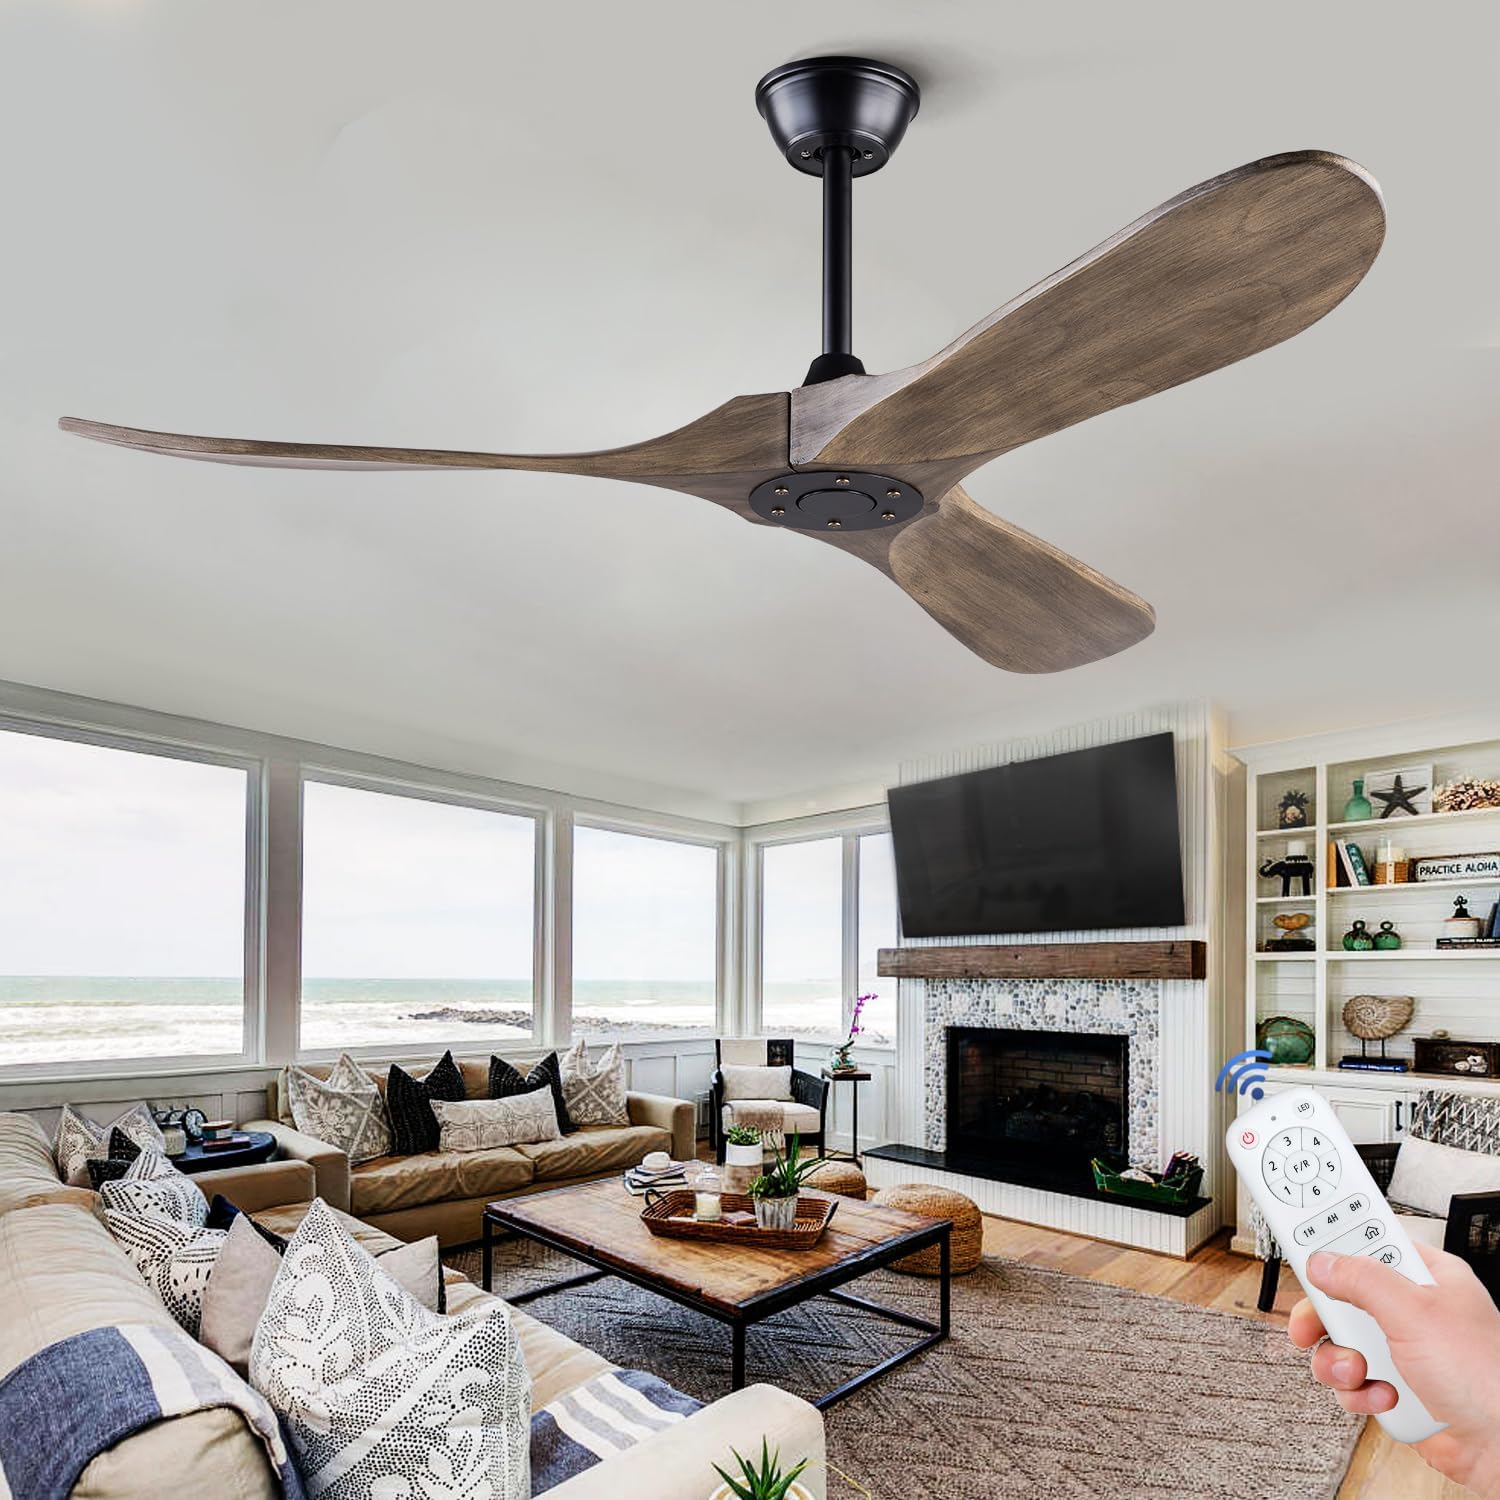 BOJUE 52 Wood Ceiling Fan Without Light Remote Control, Low Profile Ceiling Fan Indoor Outdoor with 3 blade for Patio Living Room, Bedroom, Office, Summer House